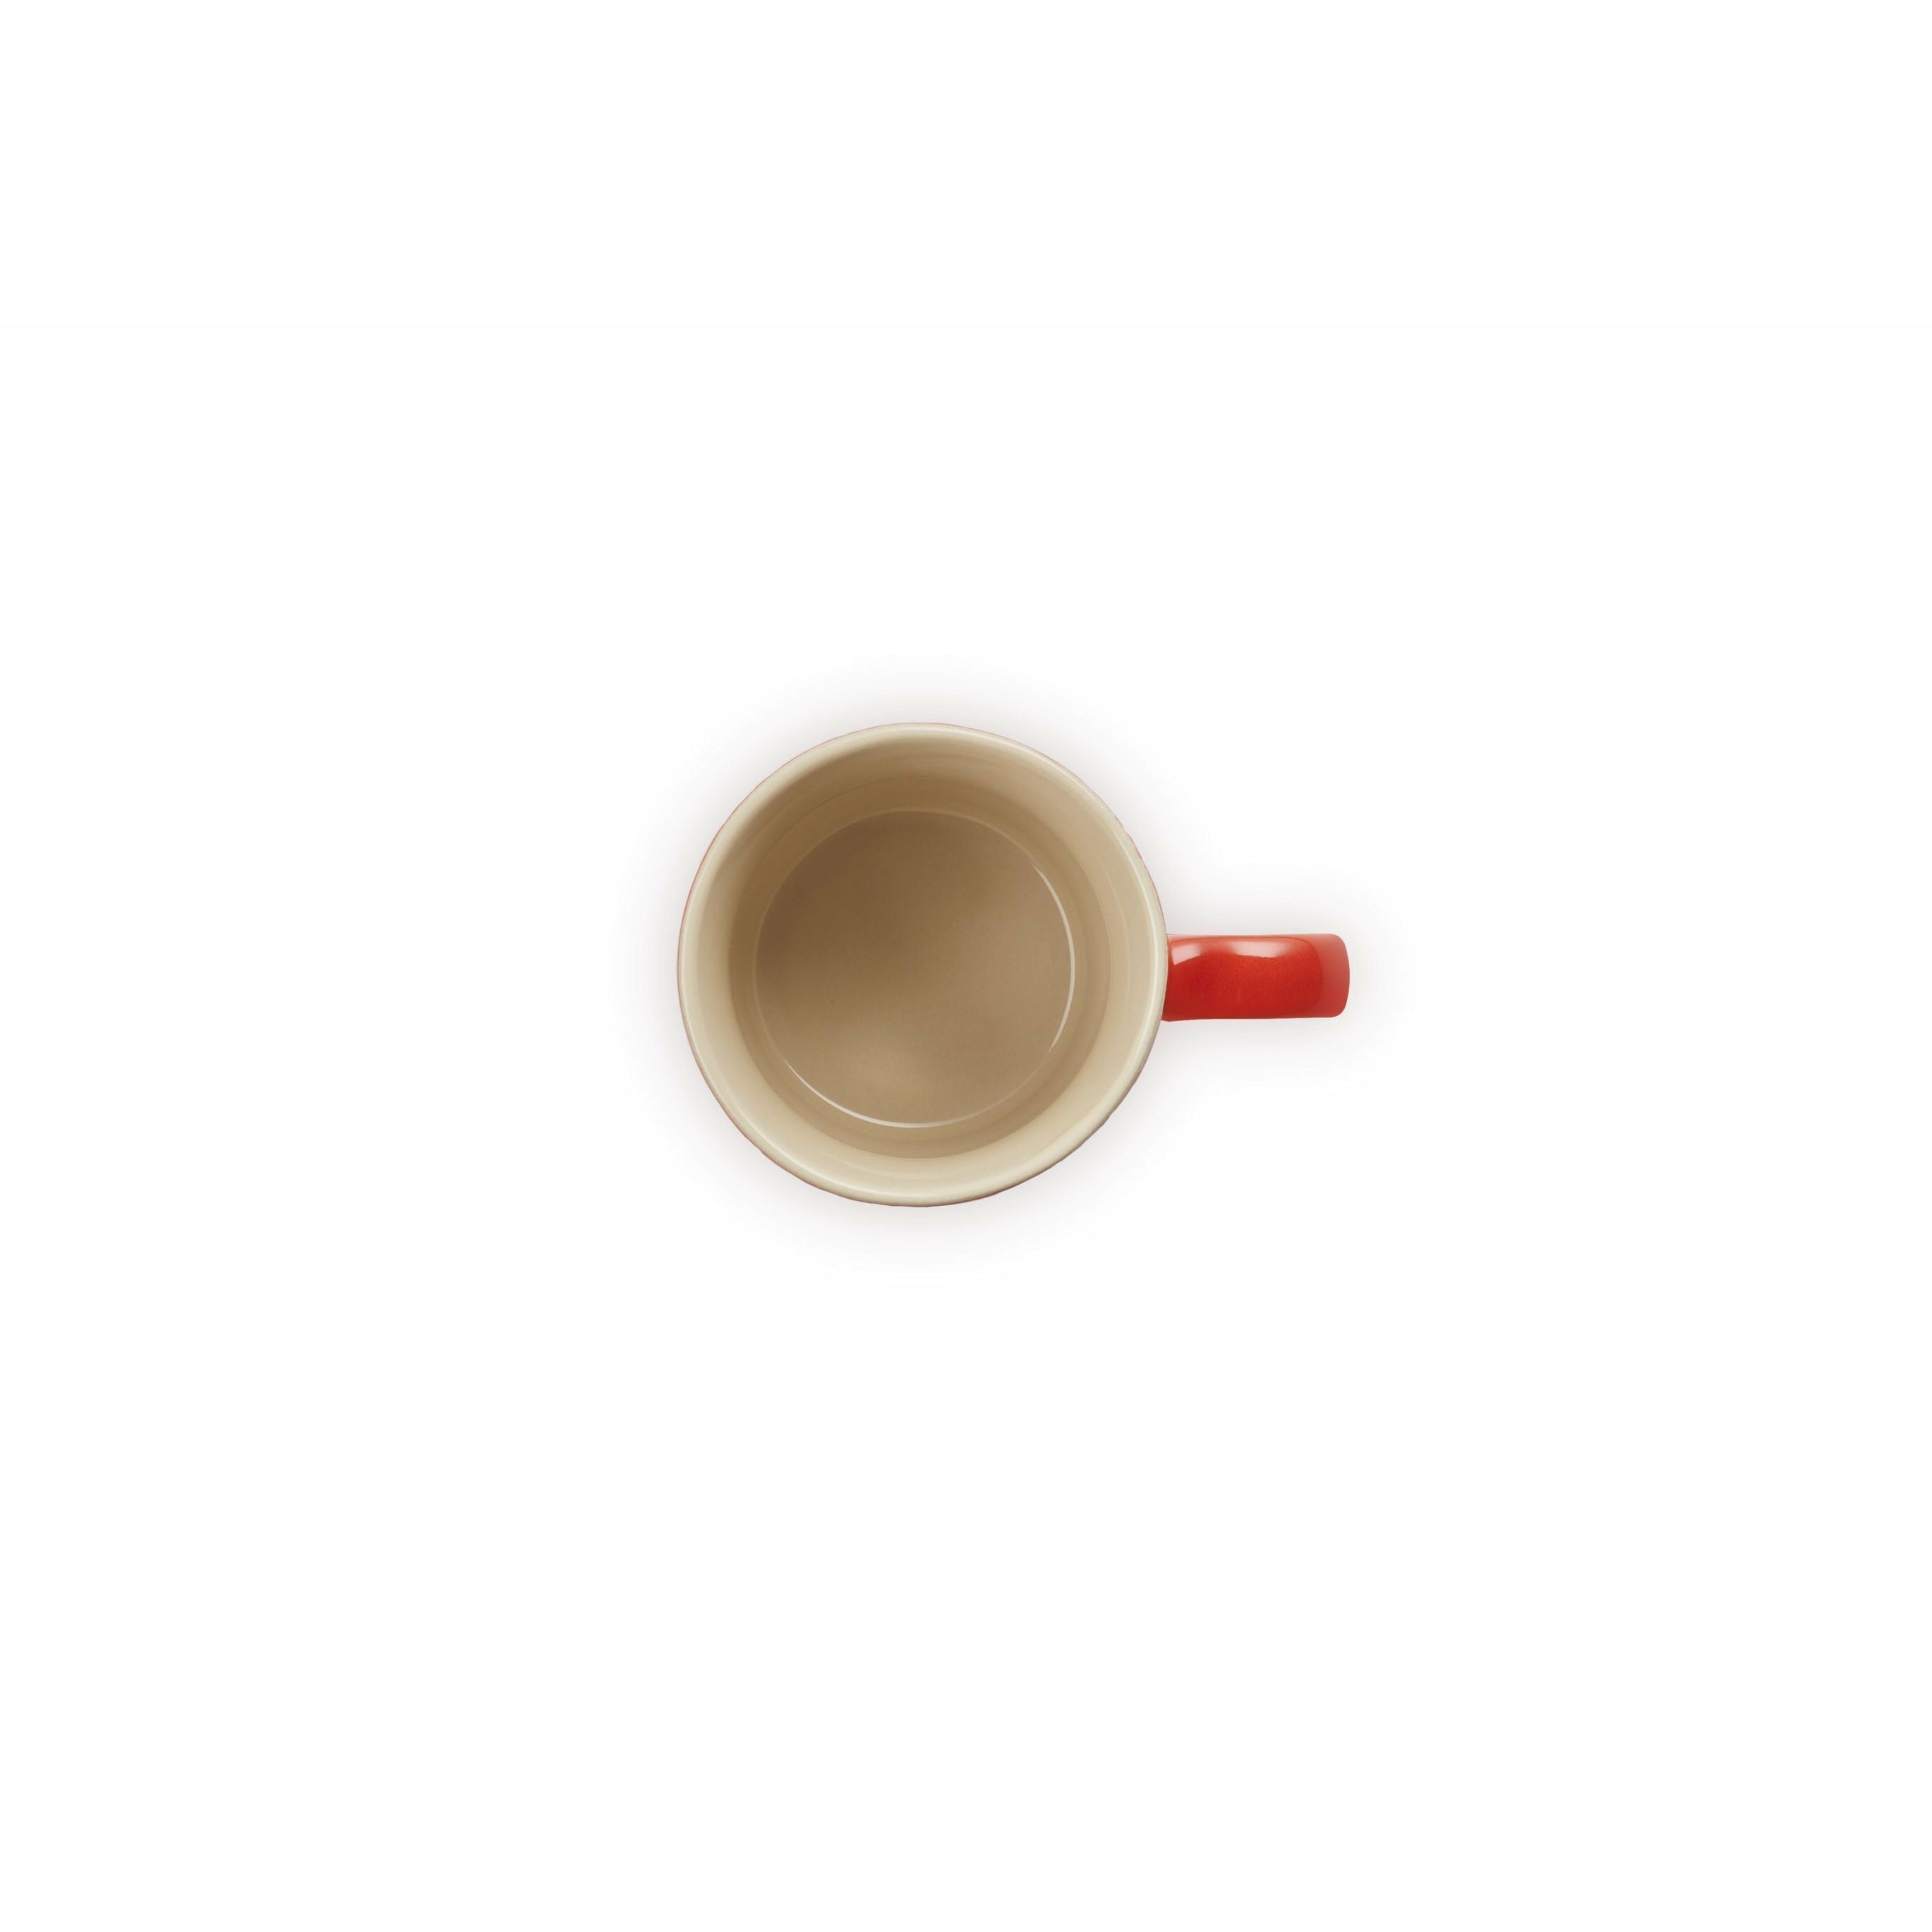 Le Creuset Espresso Cup 100 Ml, Cherry Red